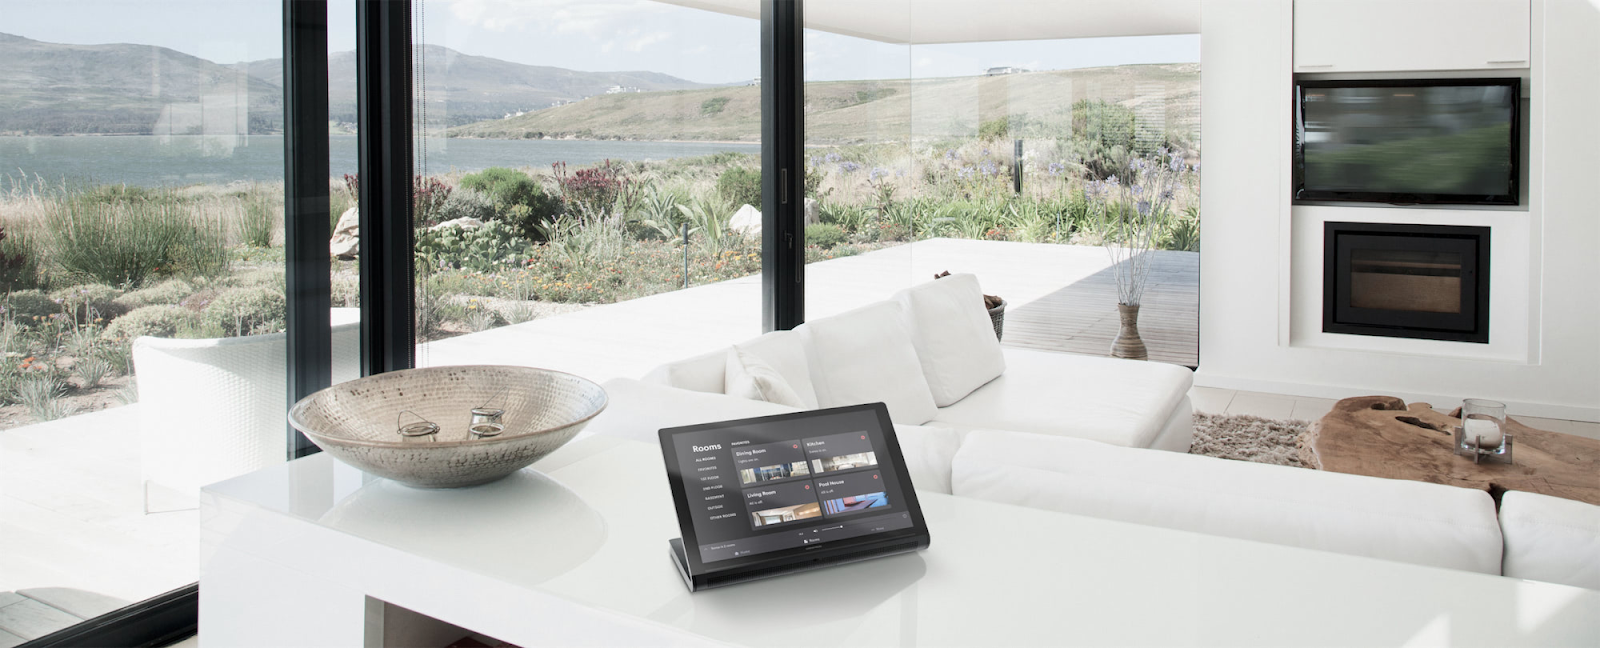 pinecrest smart home with Crestron smart technology